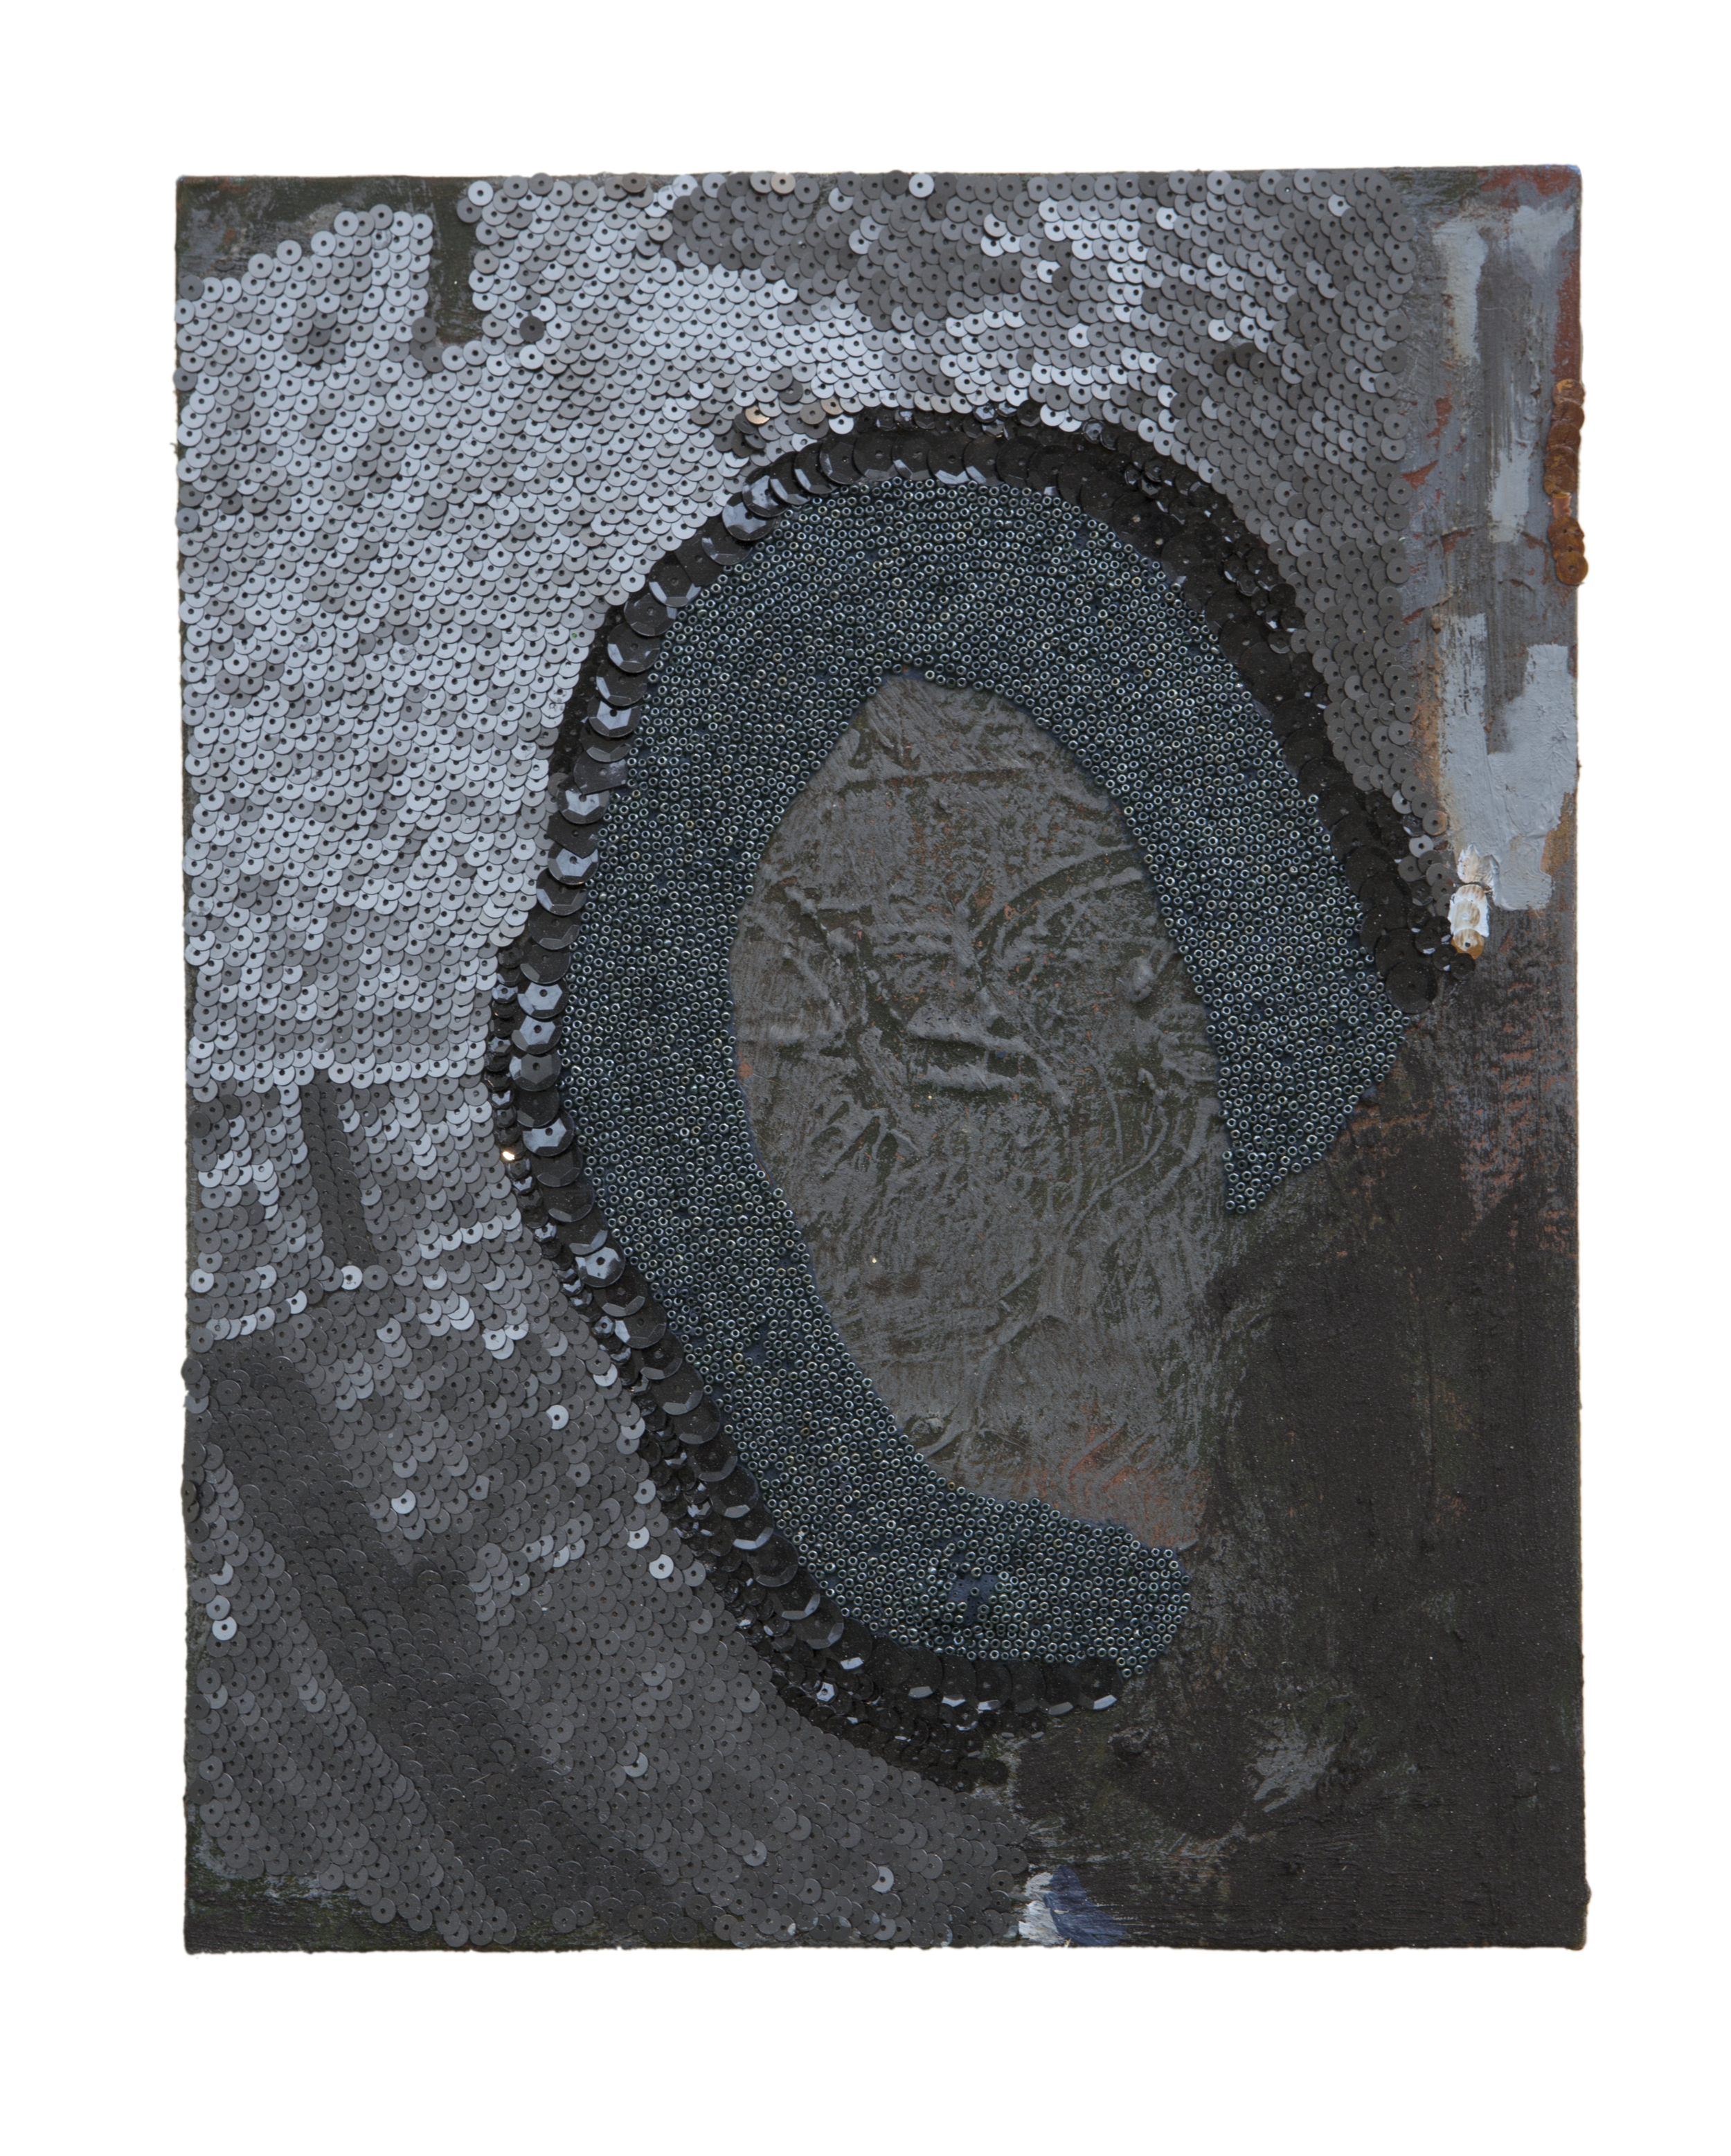  Alphabets and Earth: South Africa, mixed media, 14” by 11”, 2014-2015. 